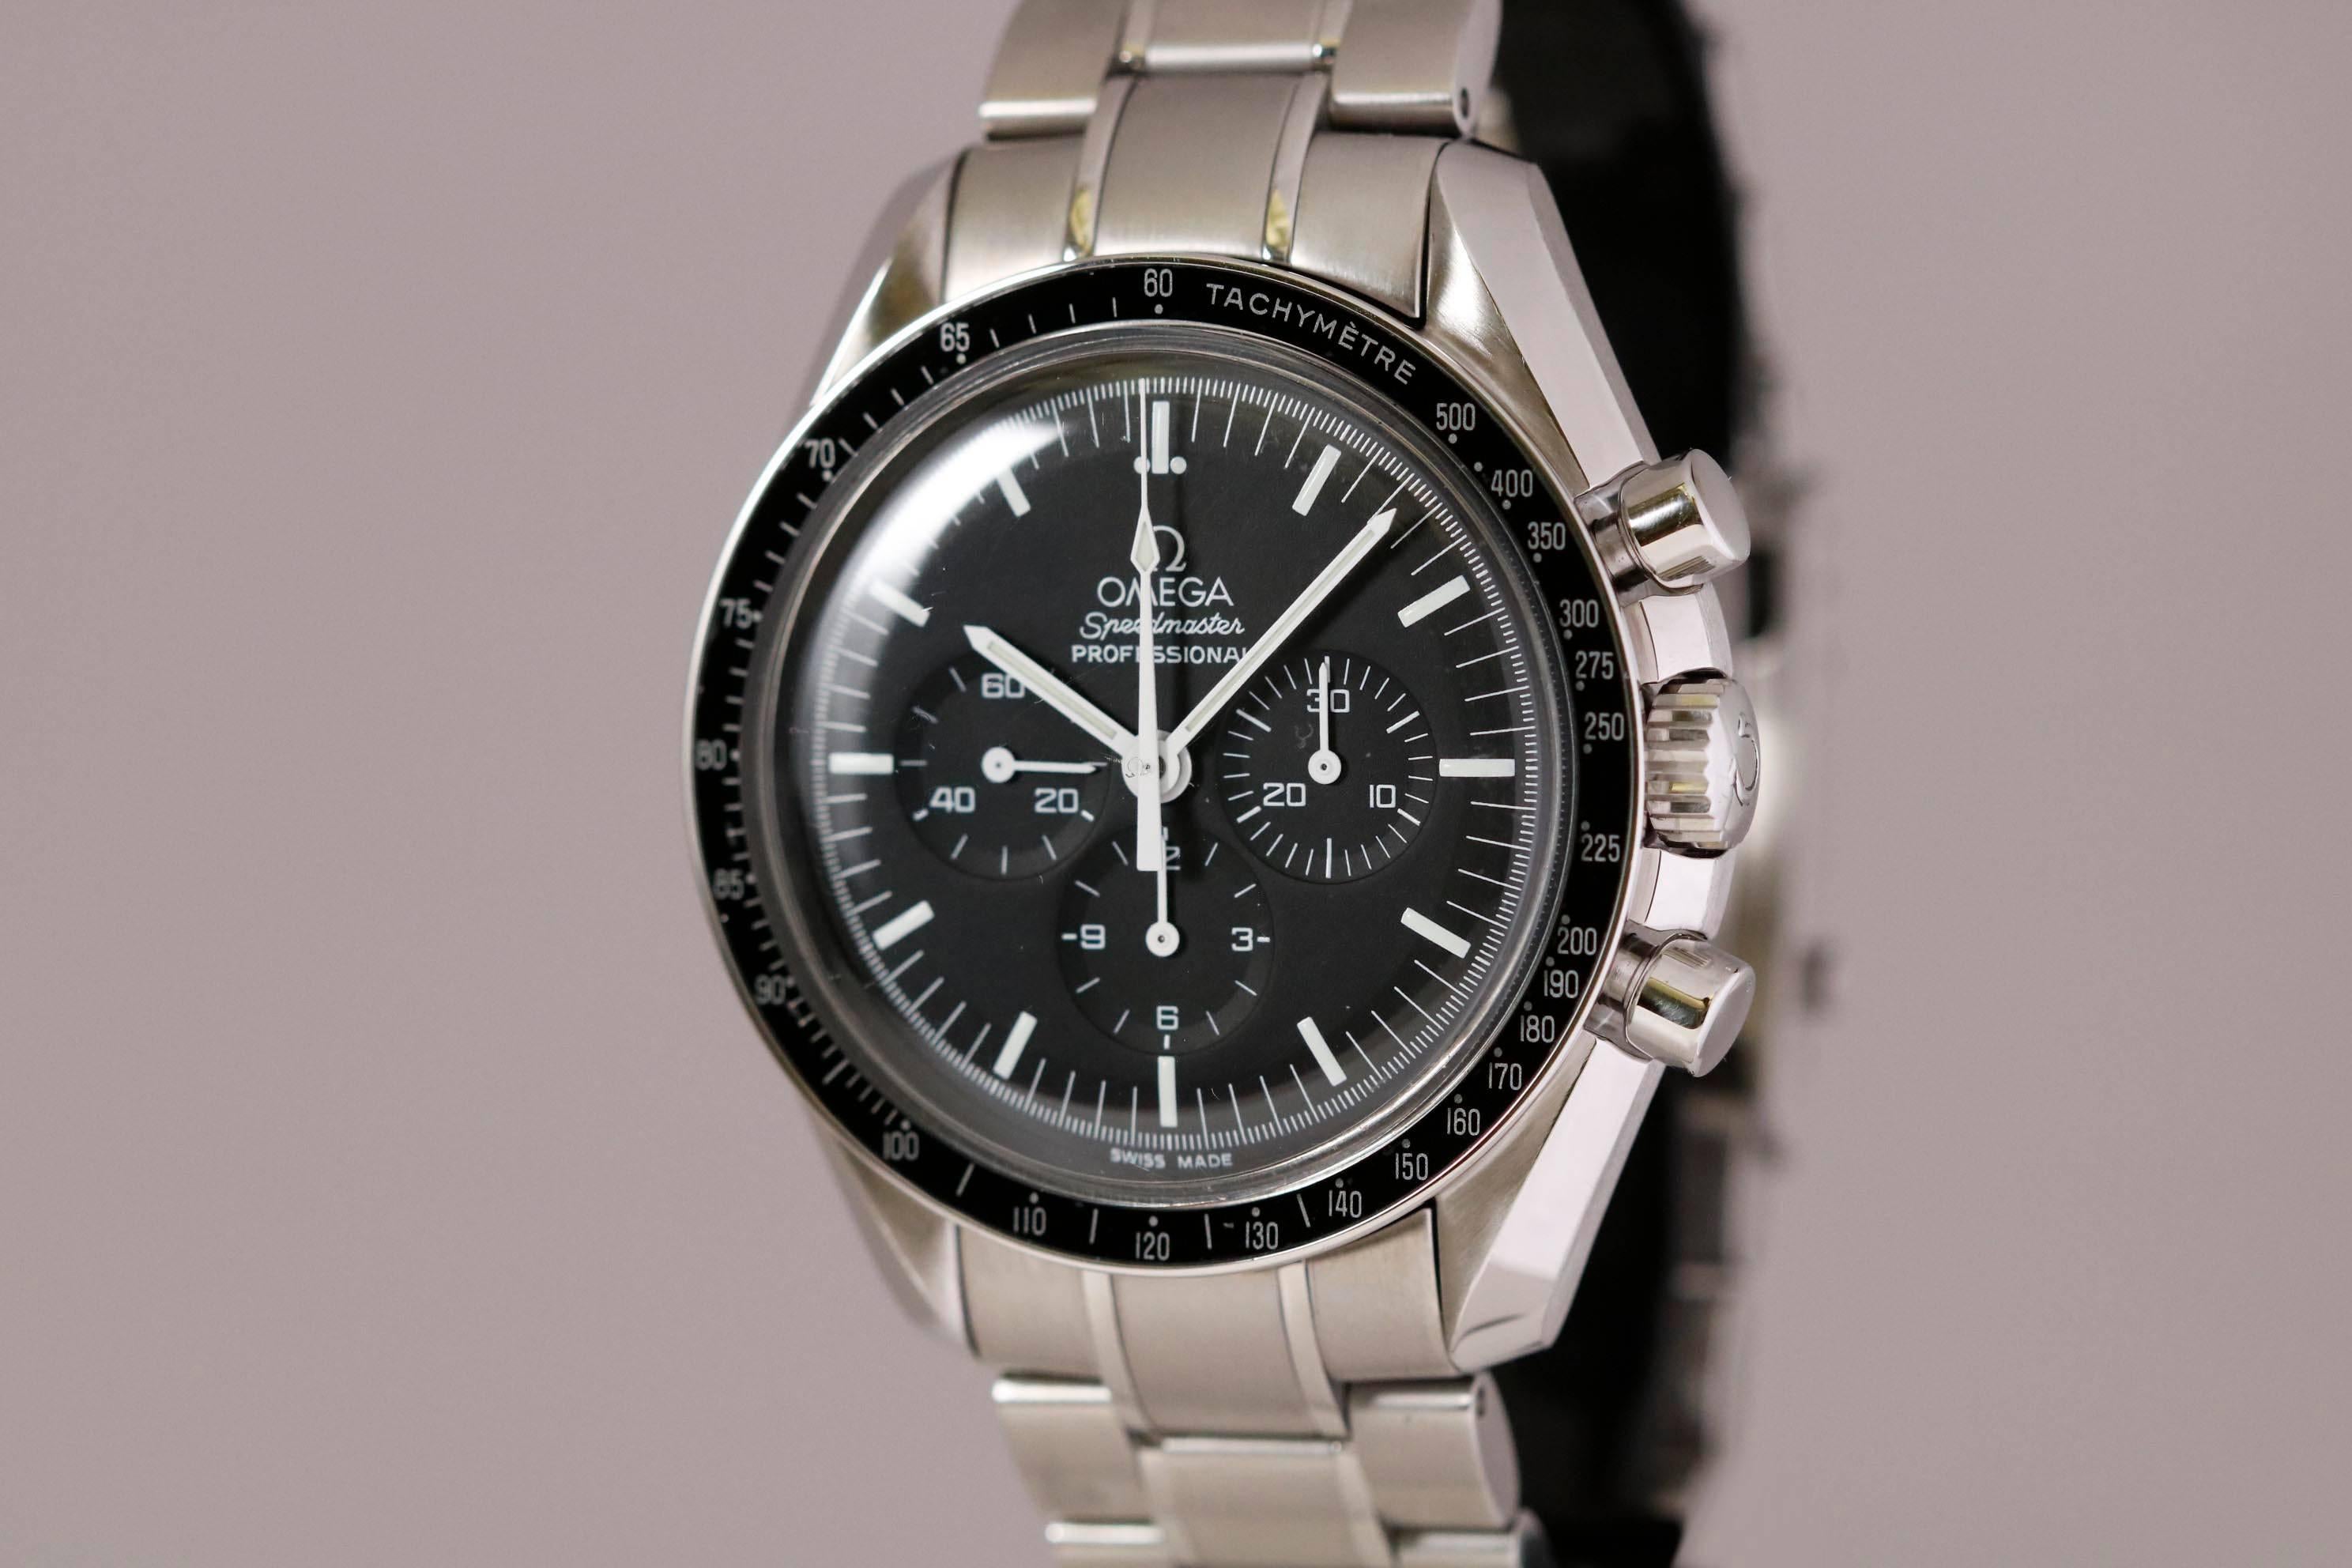 Pre-owned Omega Speedmaster Professional ref 145.002/345.002 chronograph with manual caliber 1861 movement, 42mm stainless steel case, two tone stainless steel bracelet with Omega deployant clasp. No box or papers. 